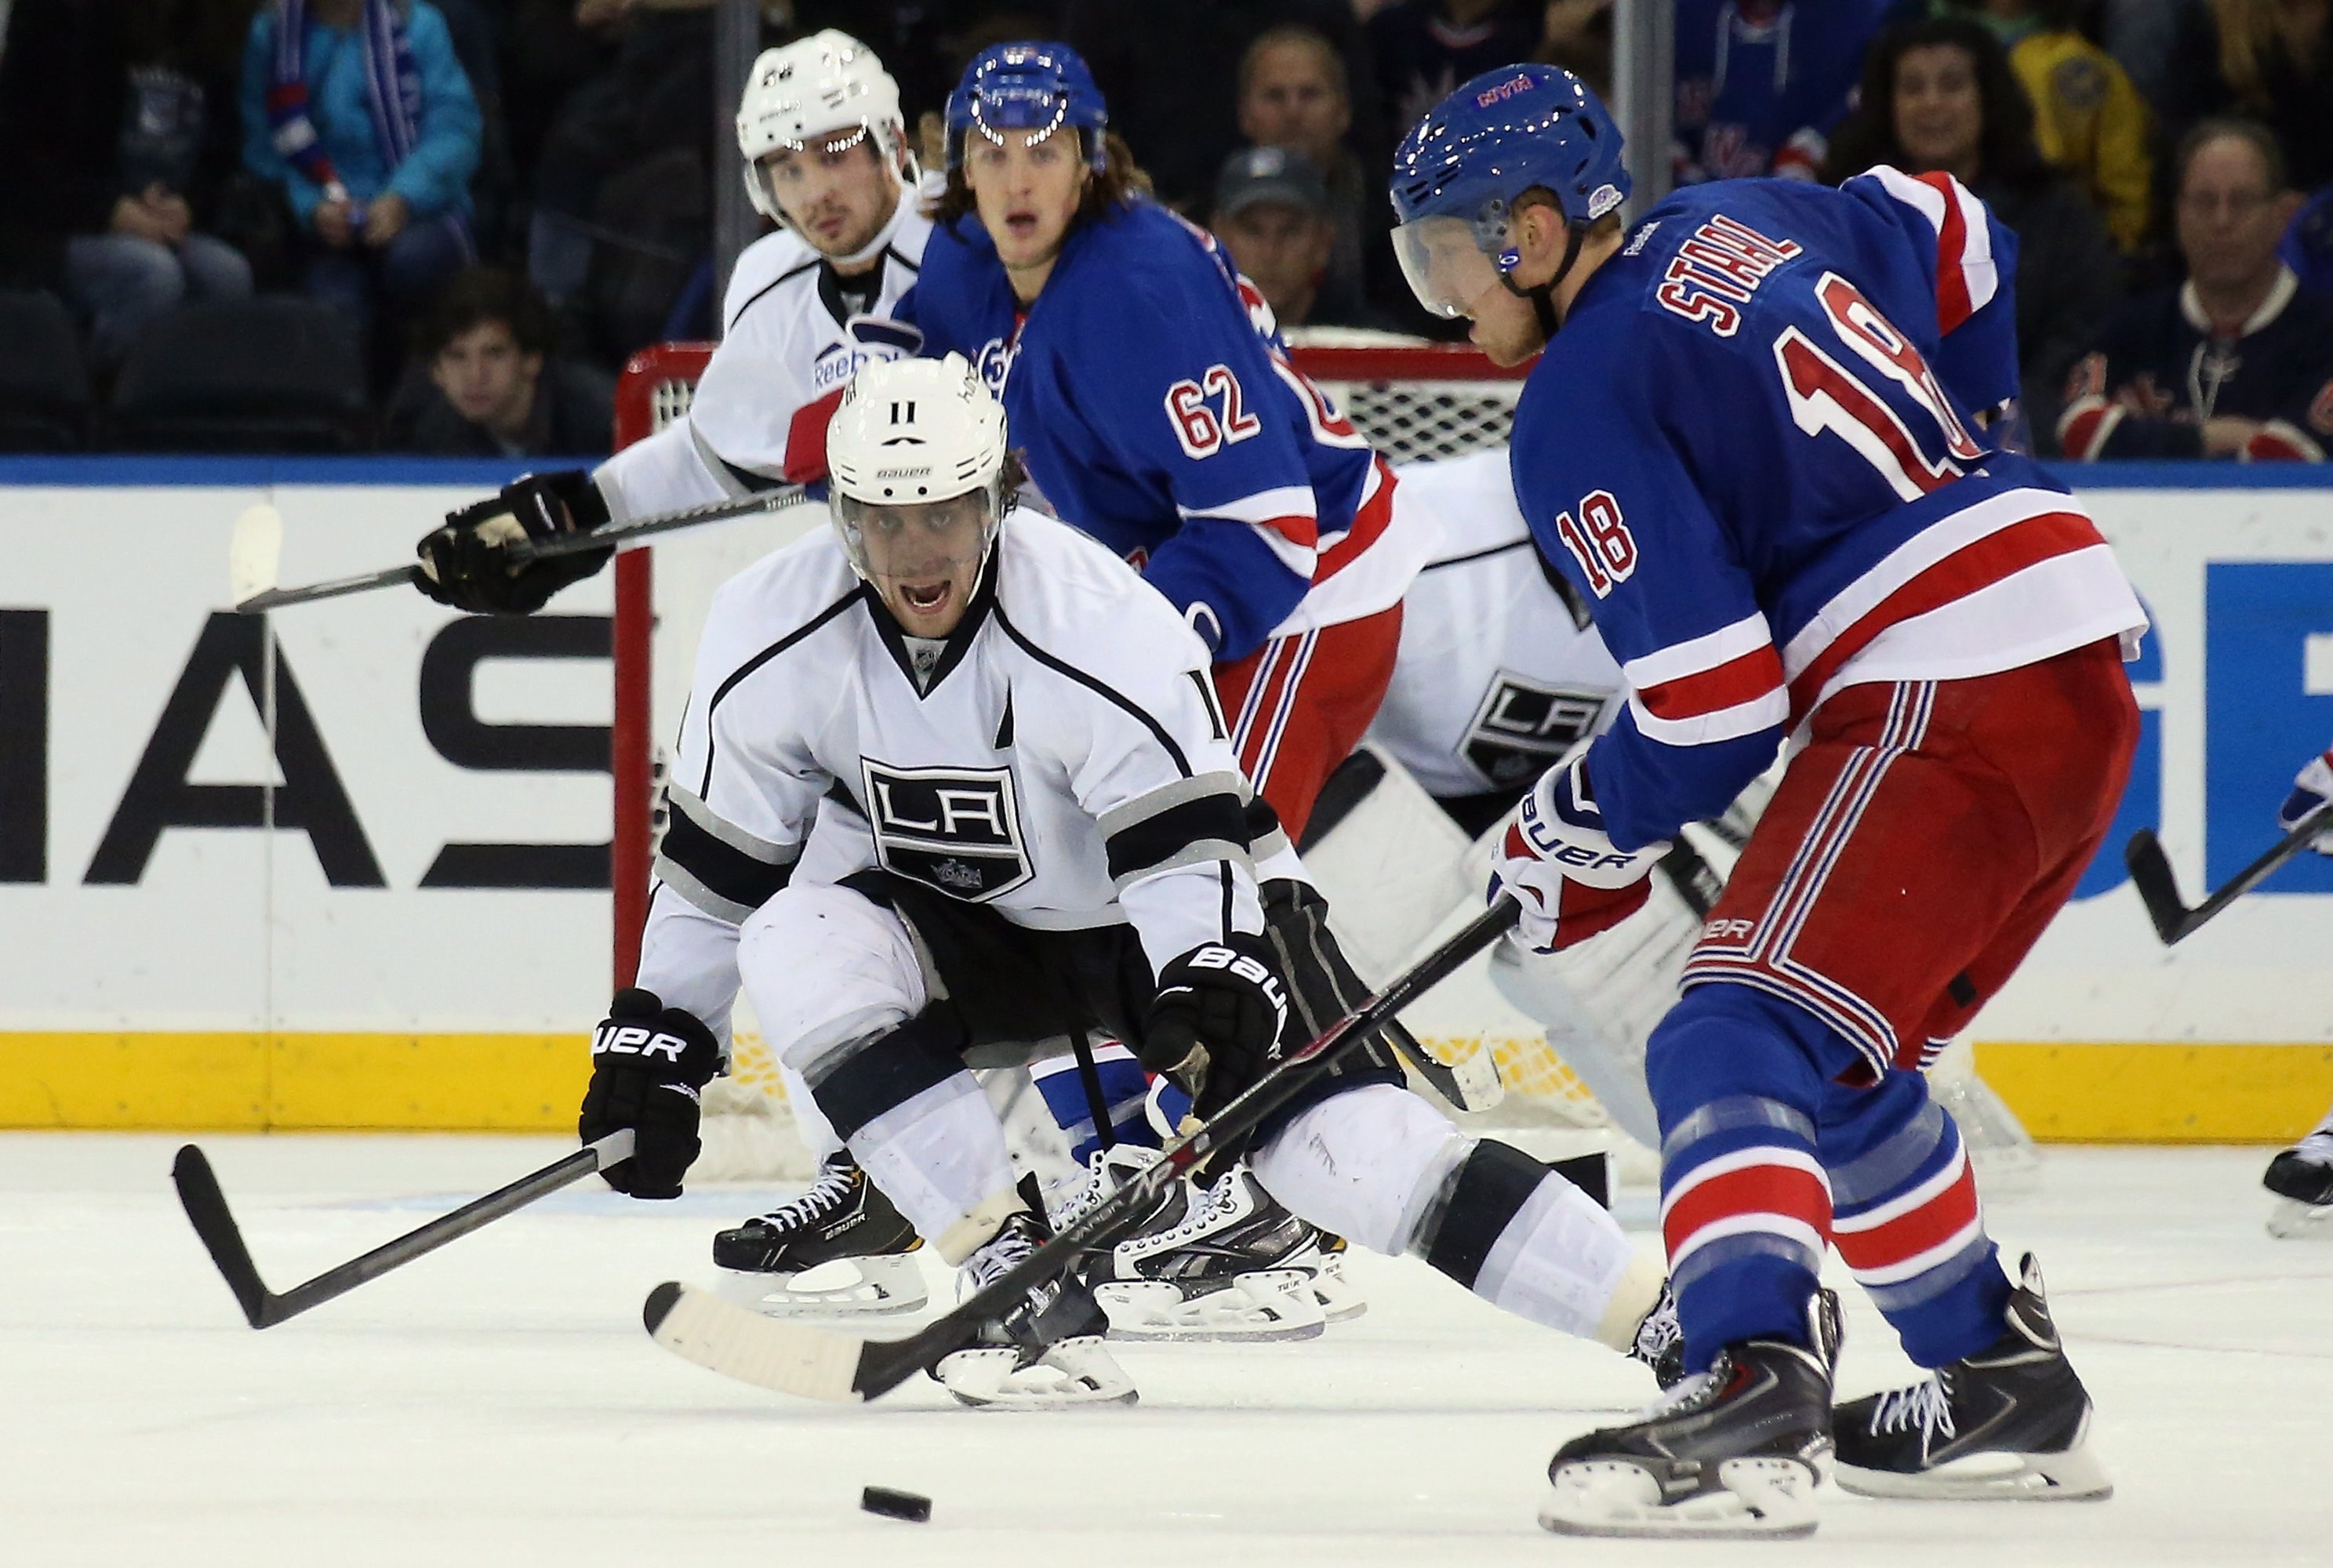 Revisiting the 2014 Stanley Cup Final - Kings vs Rangers